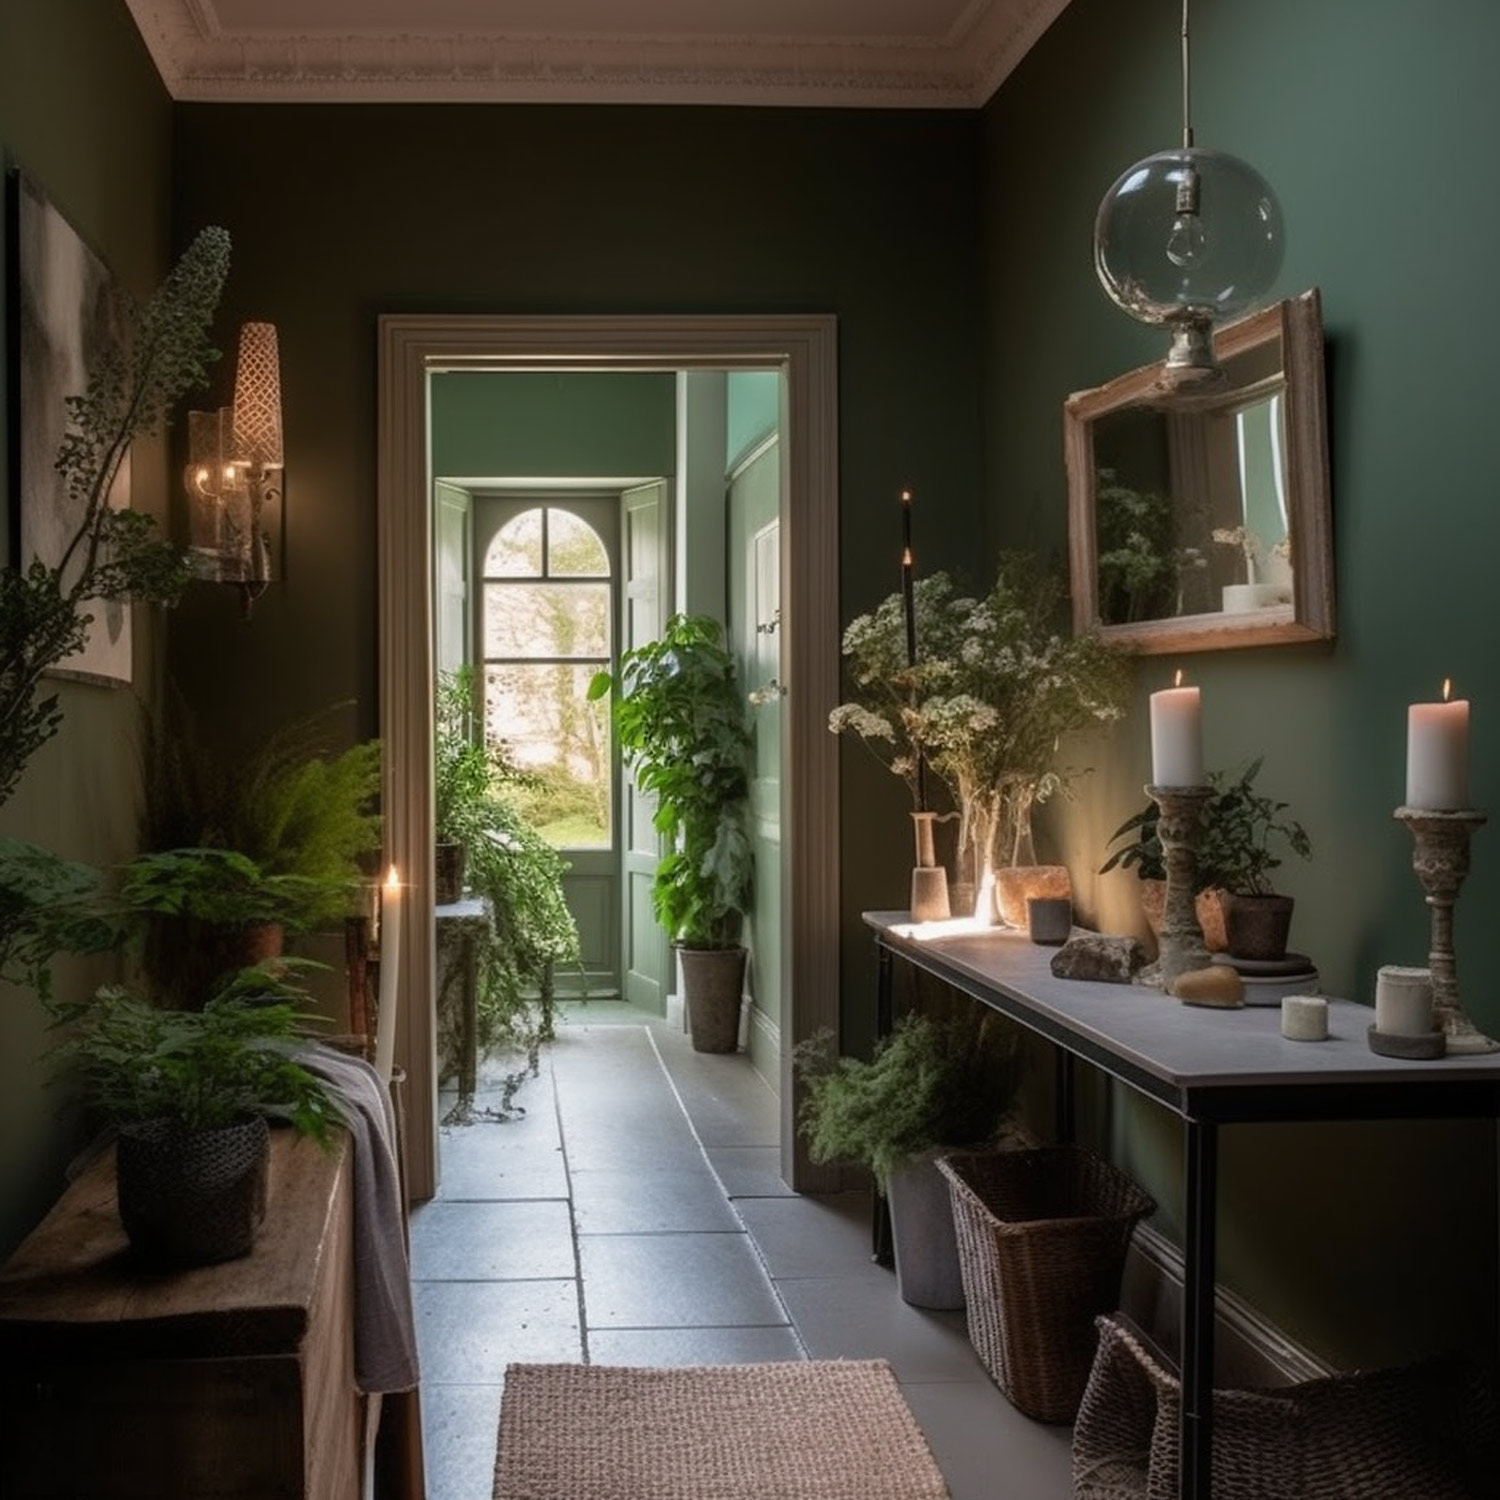 Embracing Green Wall Paints for a Vibrant and Tranquil Home